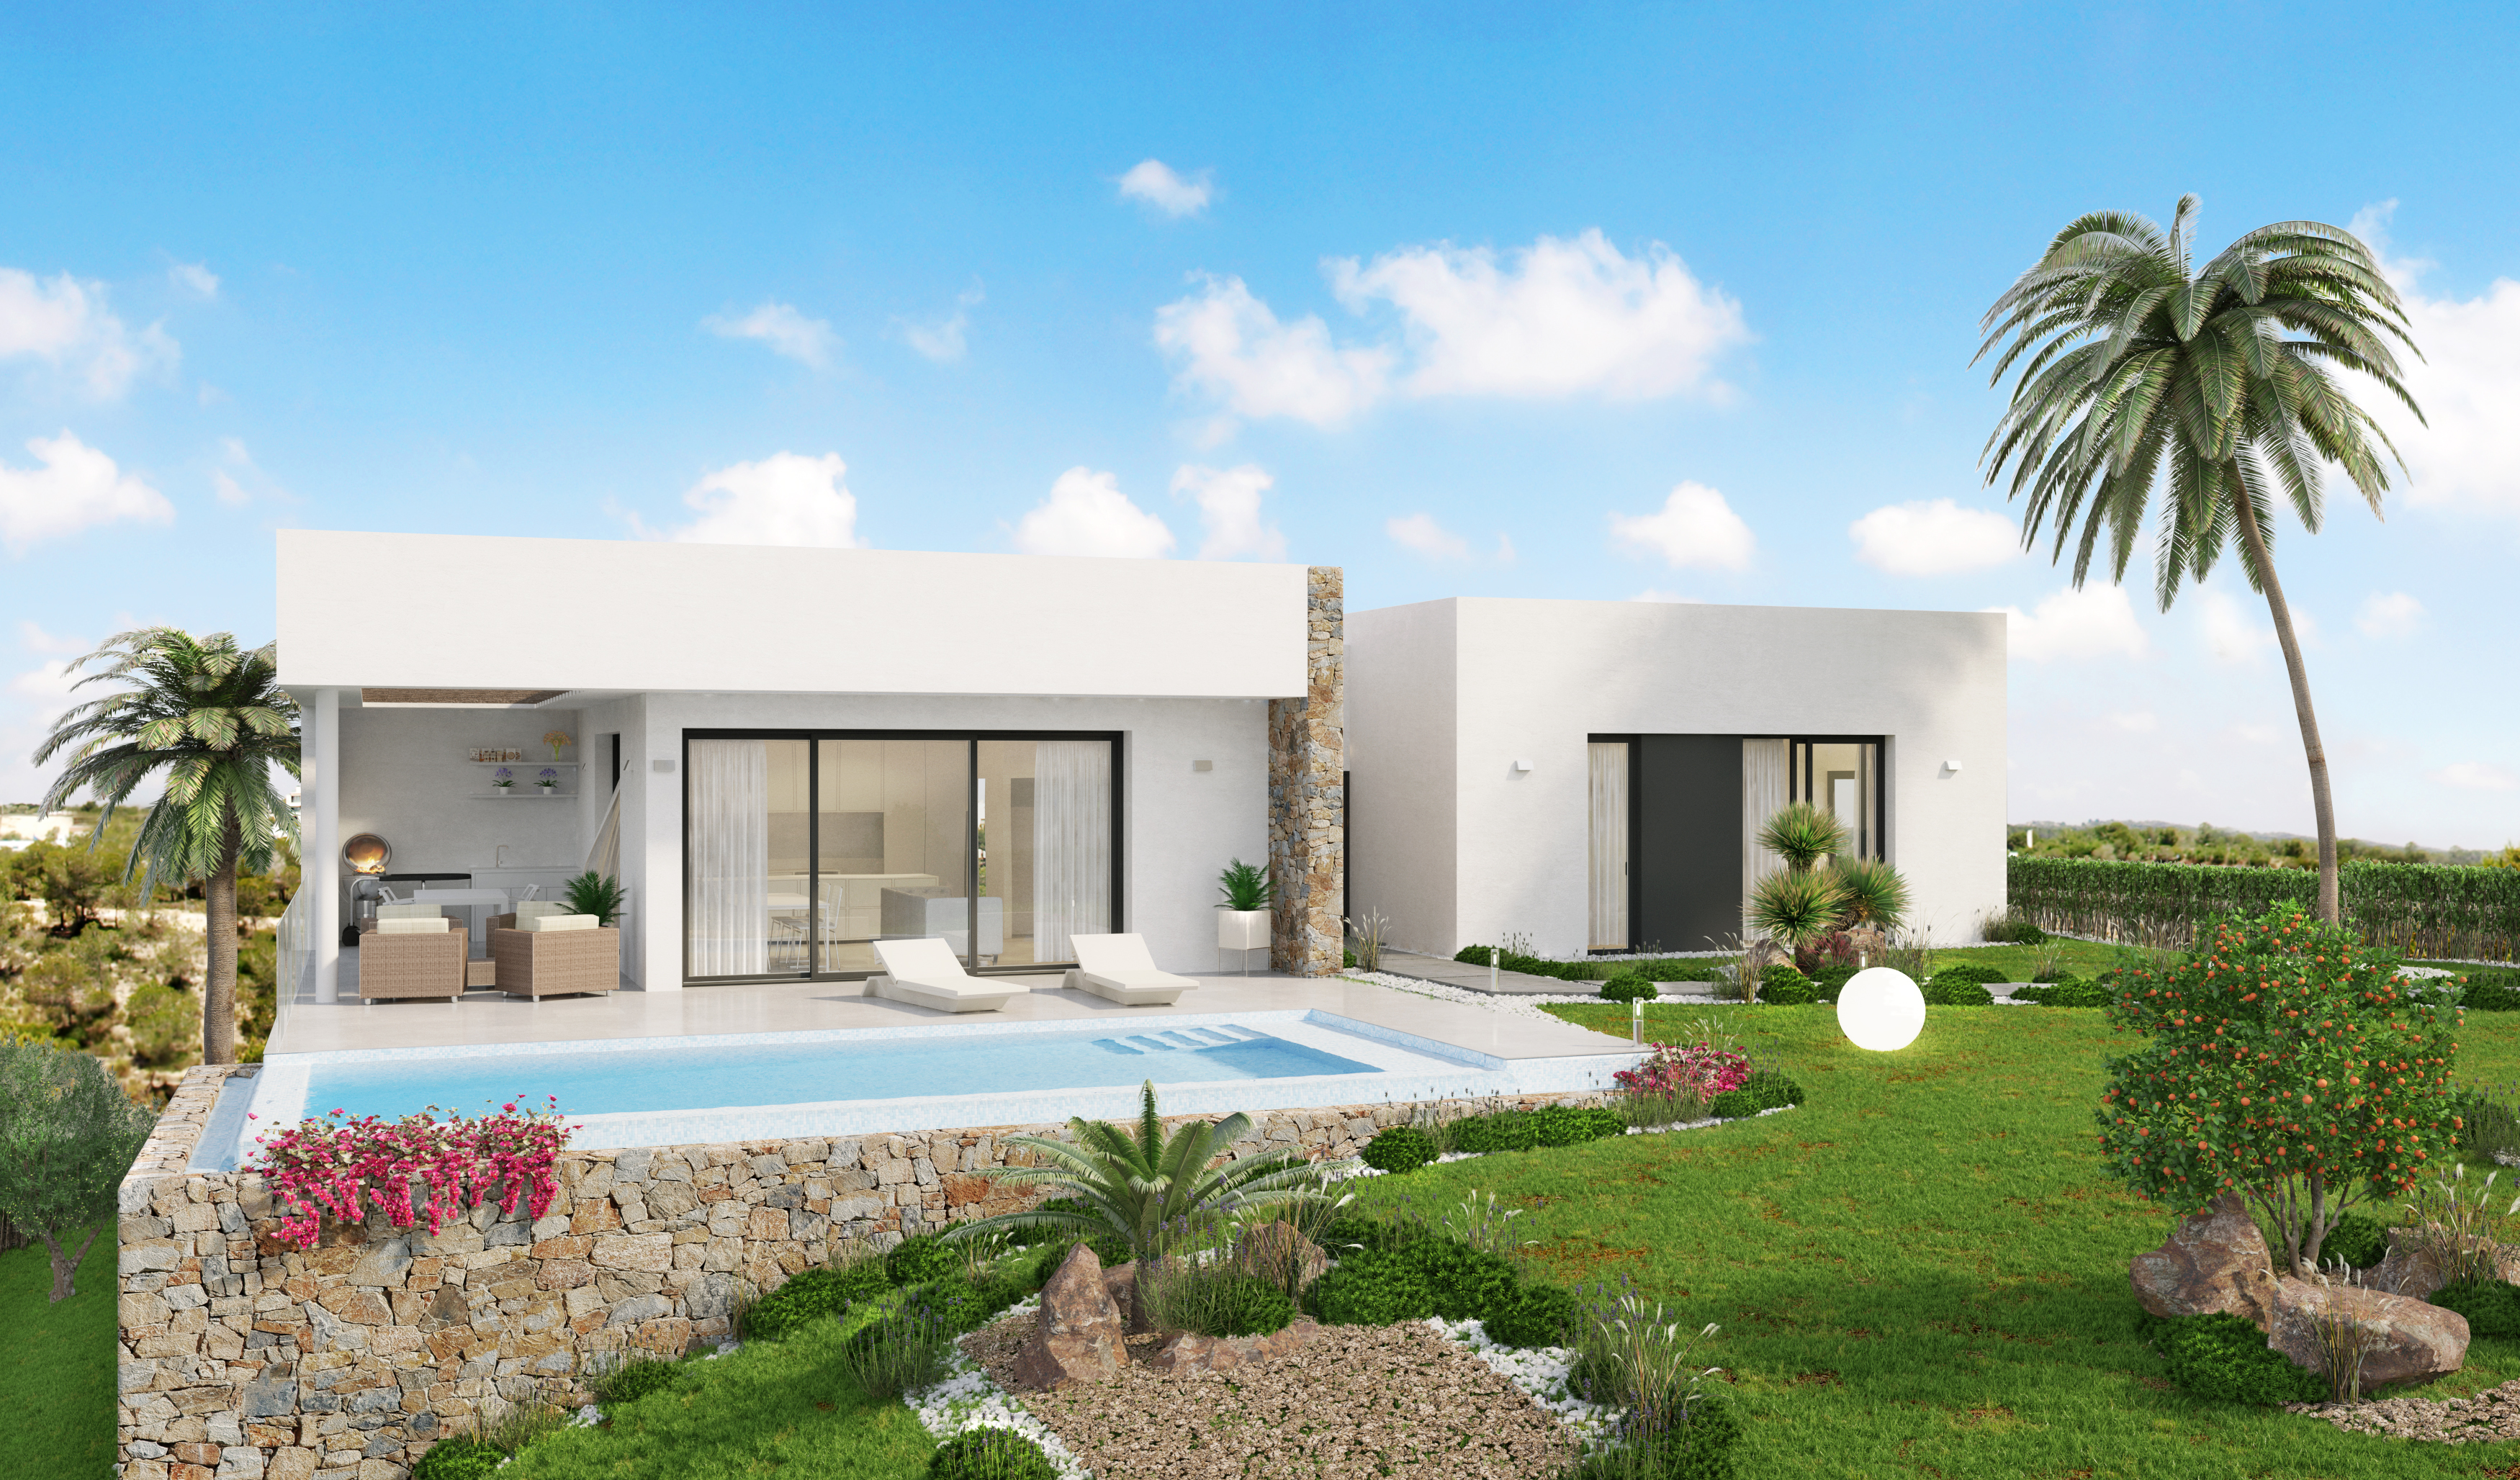 New build golf villas on Southern Costa Blanca embedded in nature.